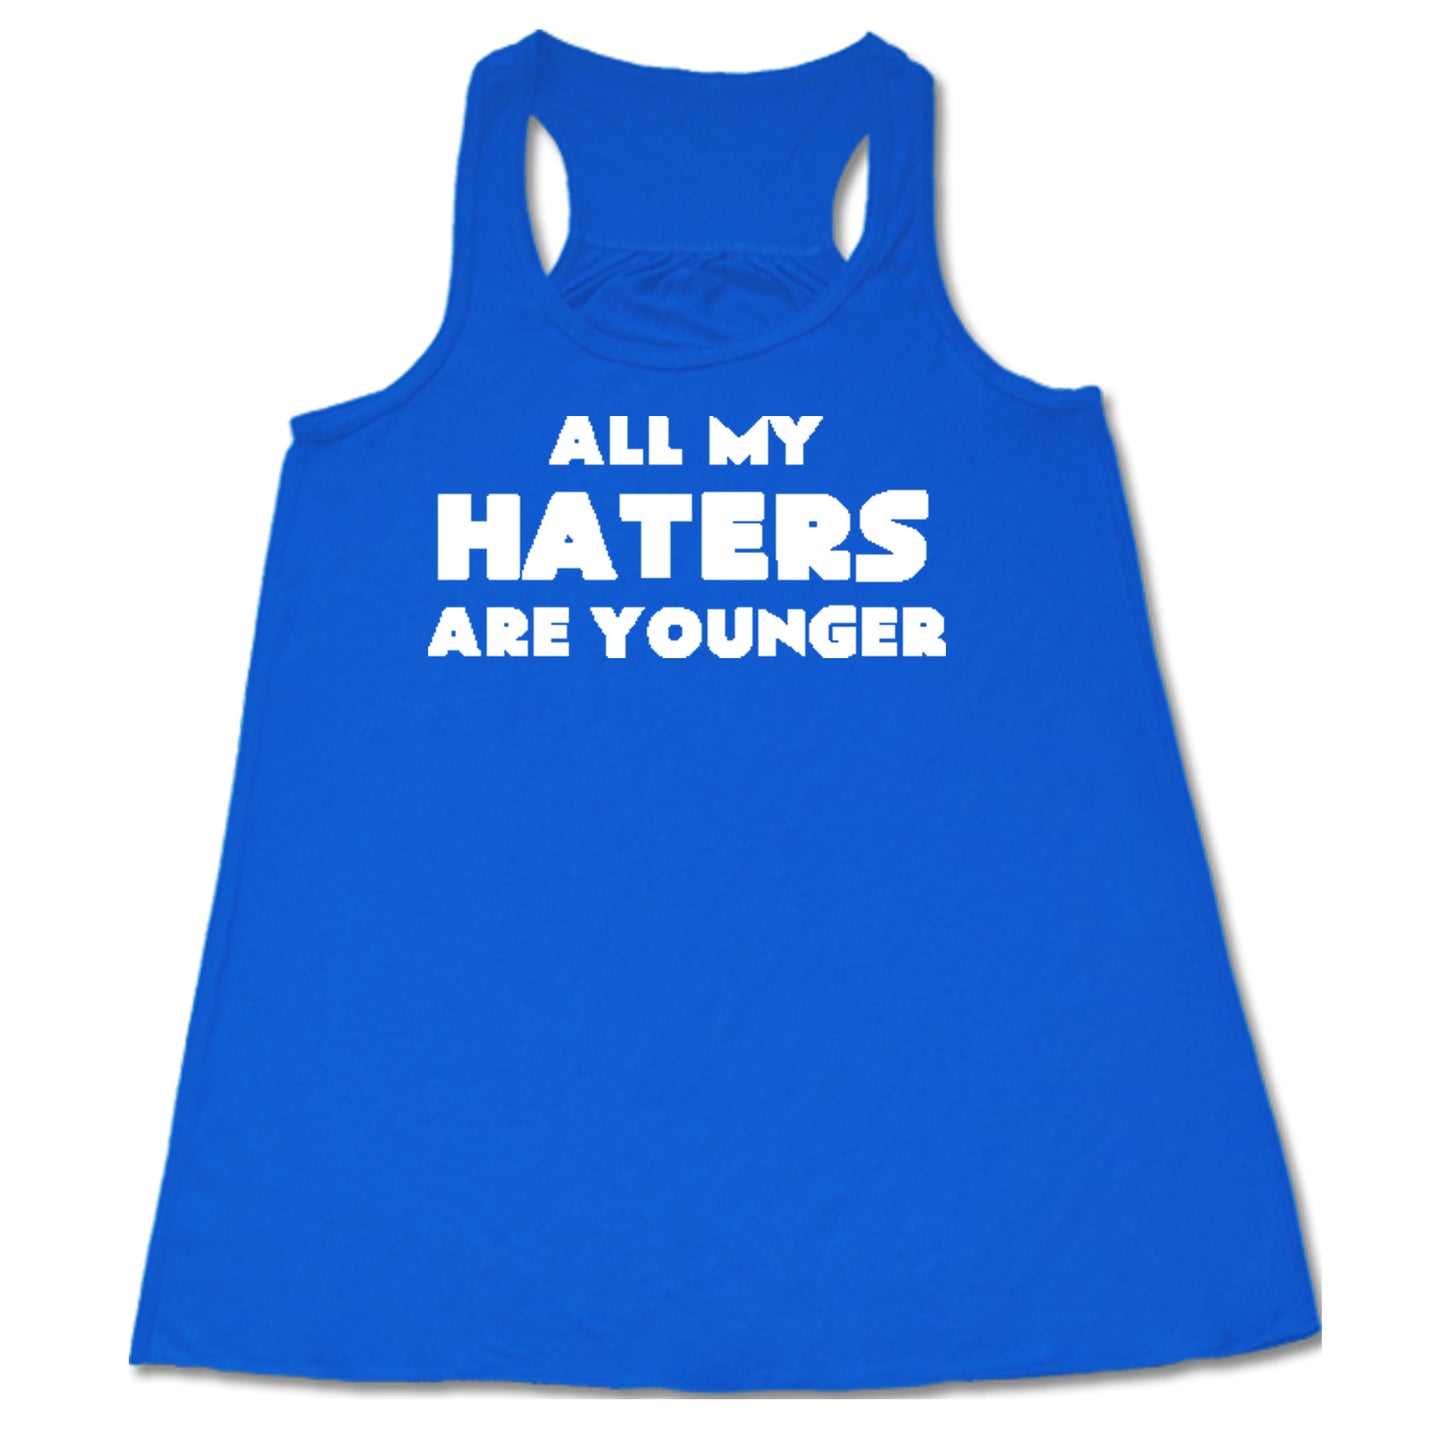 All My Haters Are Younger Shirt